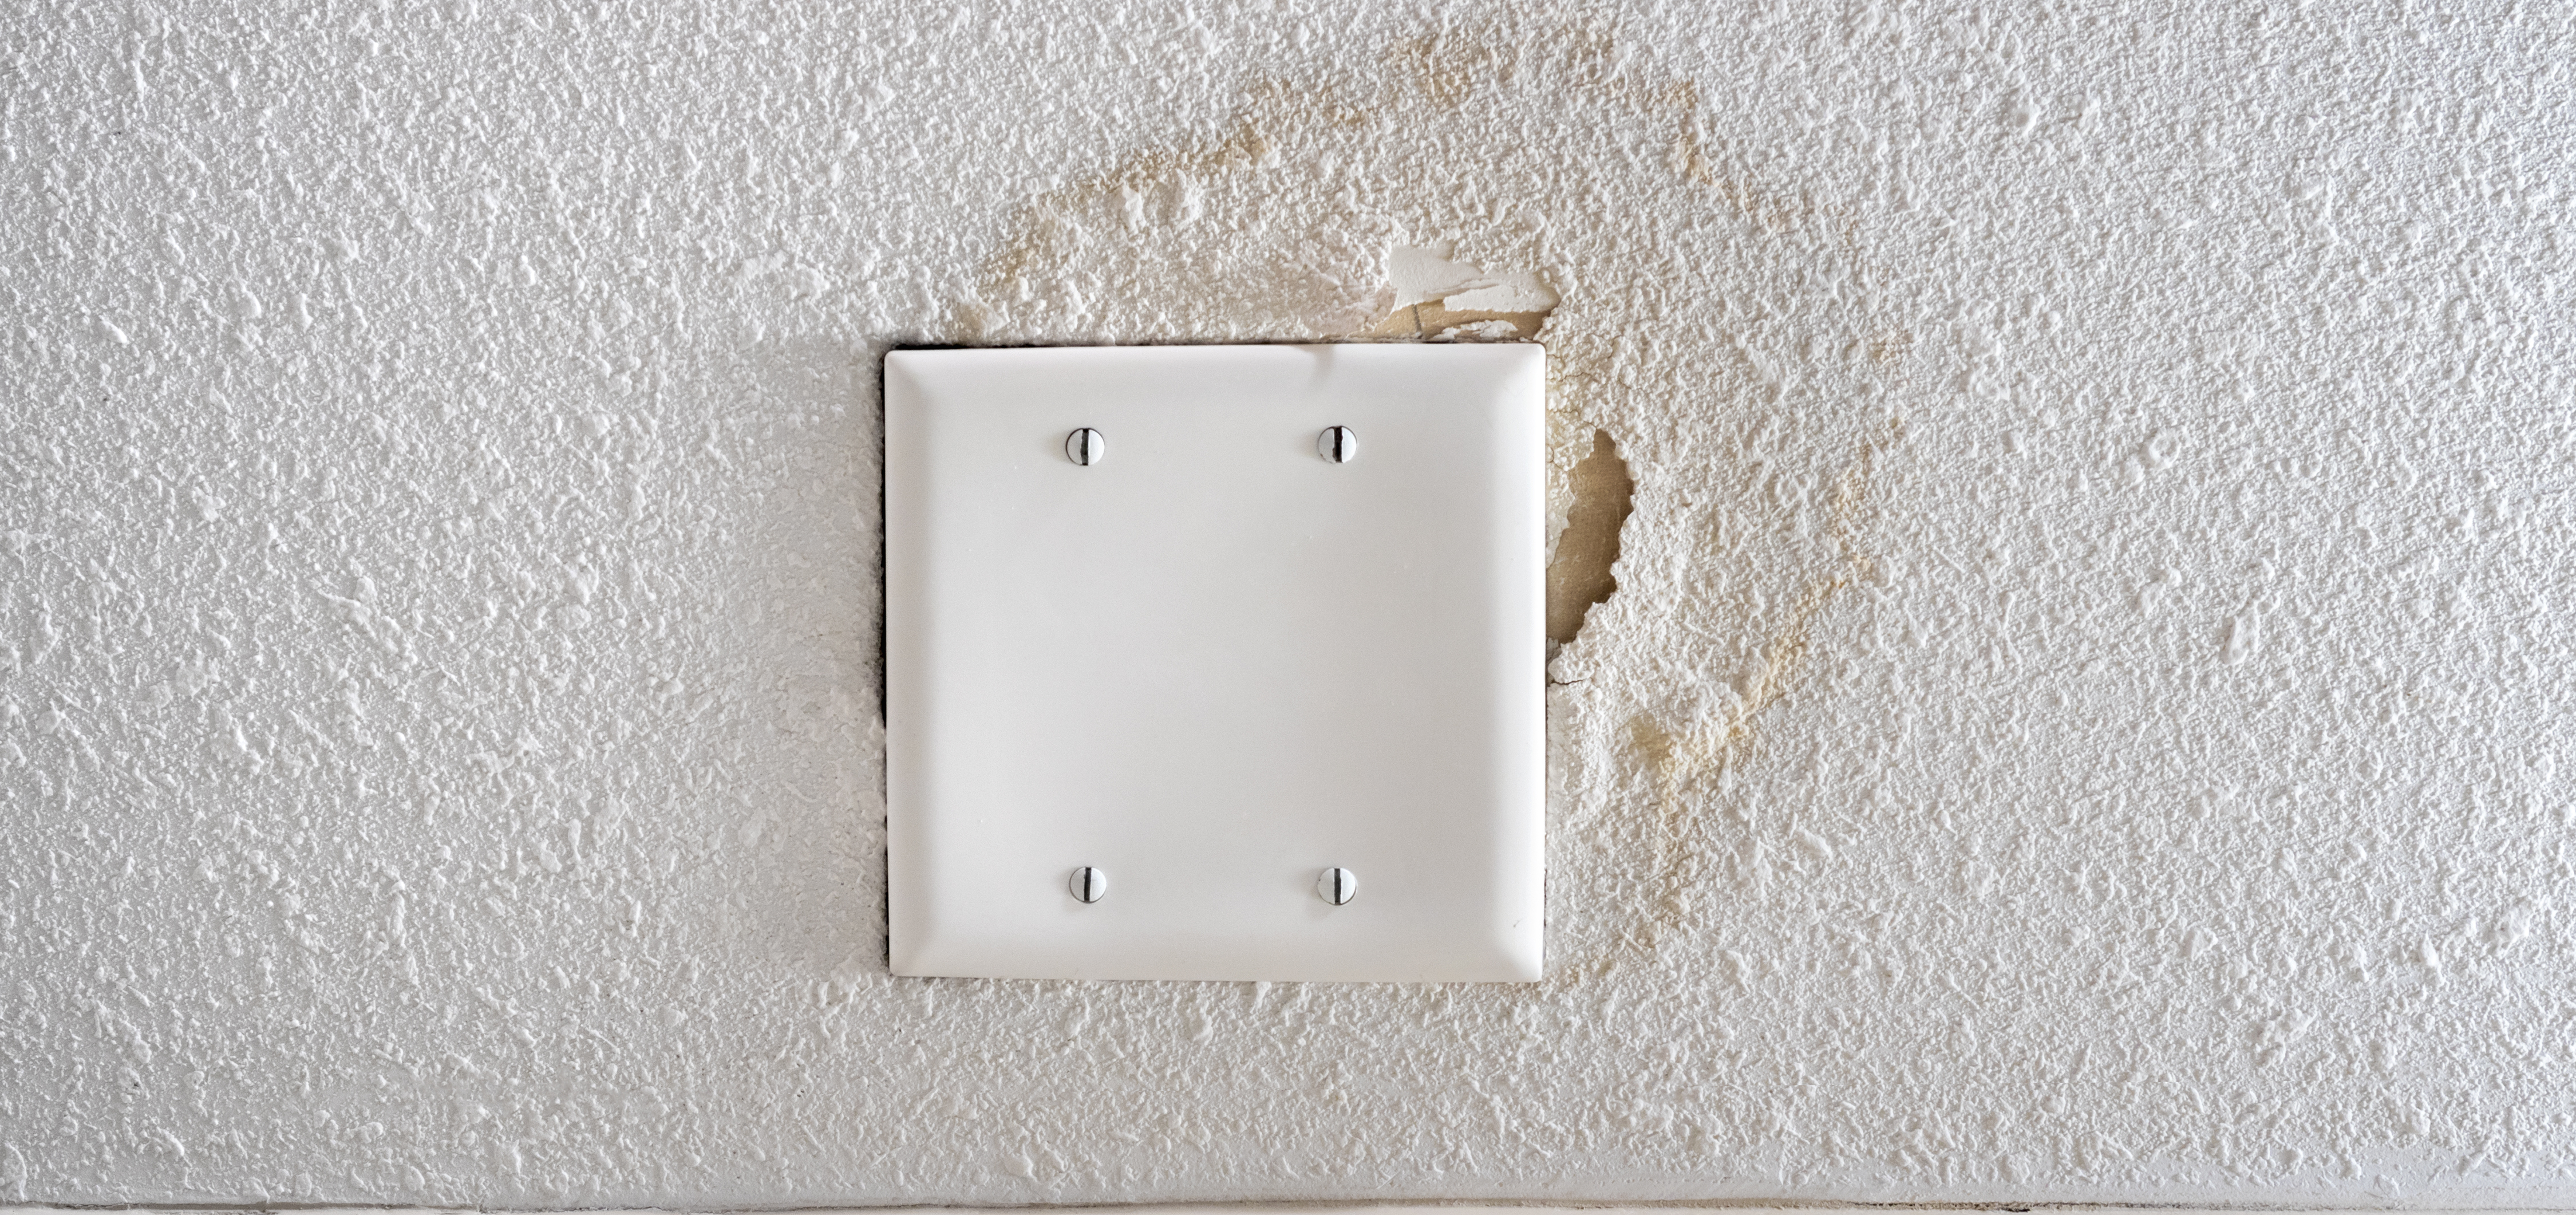 How To Get Black Mold Off Popcorn Ceiling Shelly Lighting